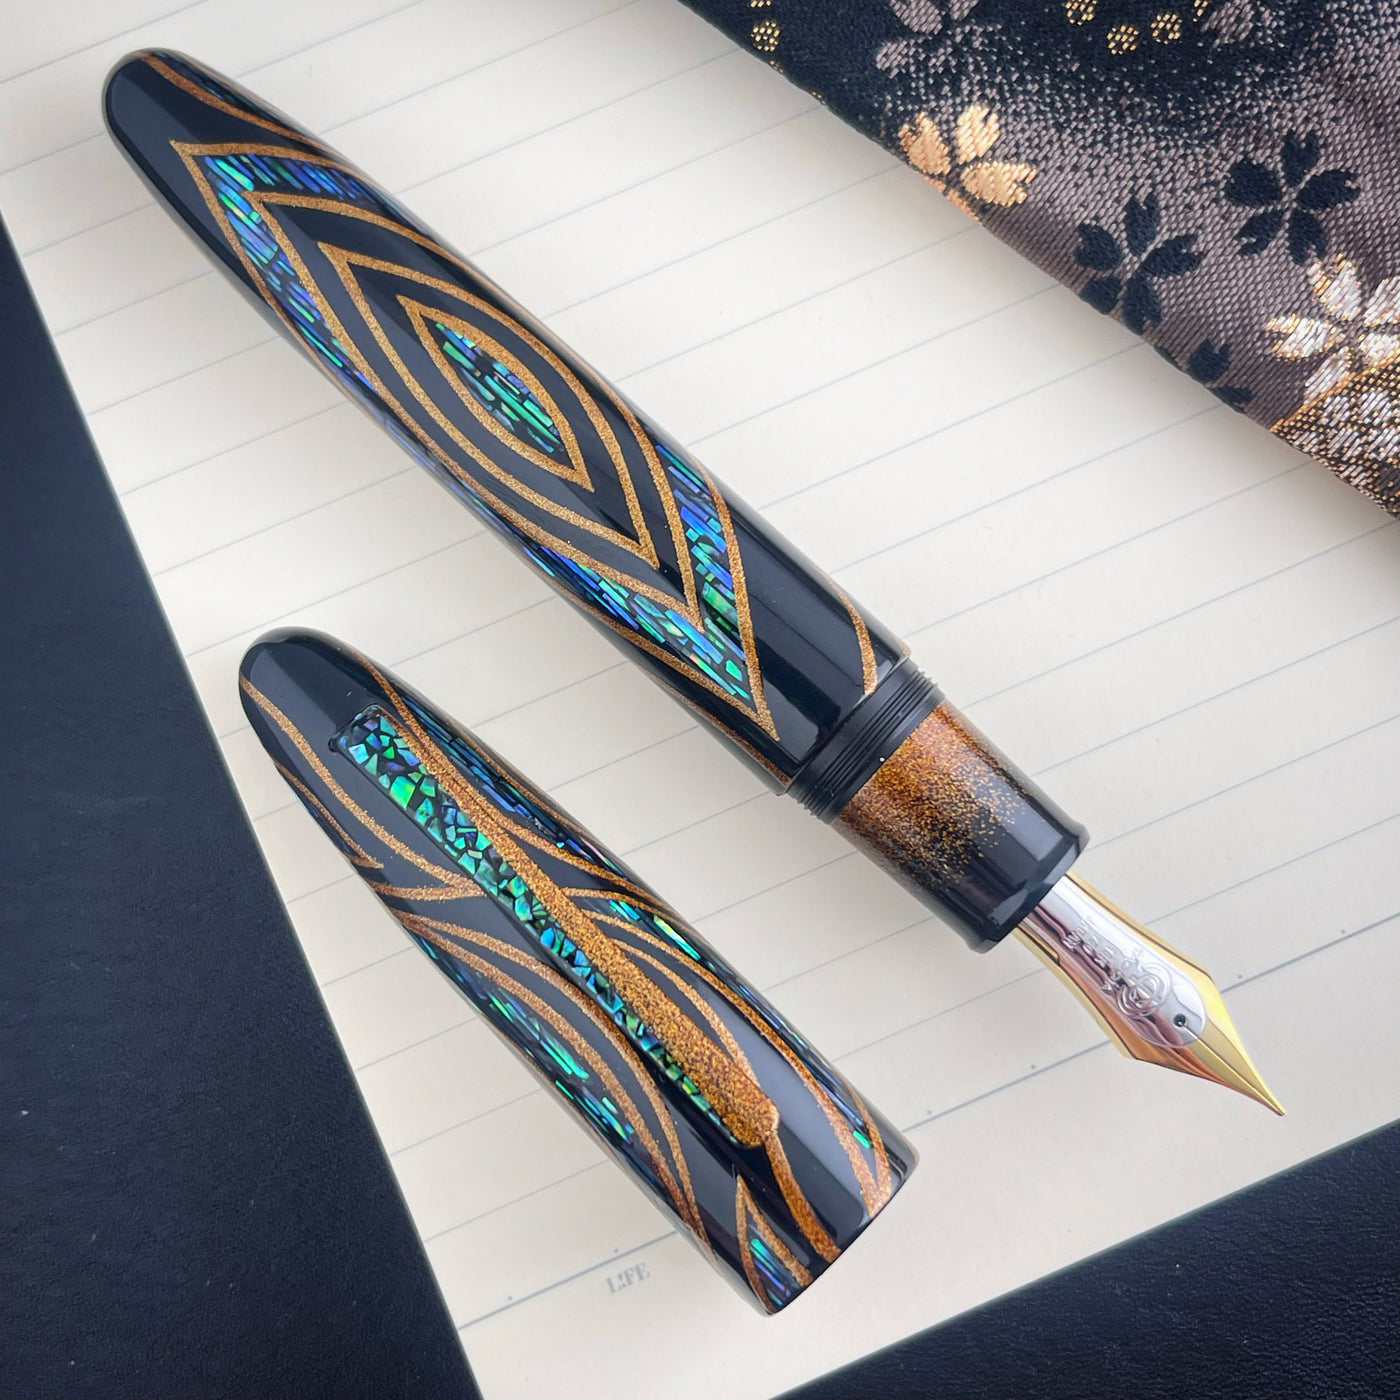 TACCIA Myabi Empress Fountain Pen - Fossils in the Sky - Sunset Peacock (Limited Edition)